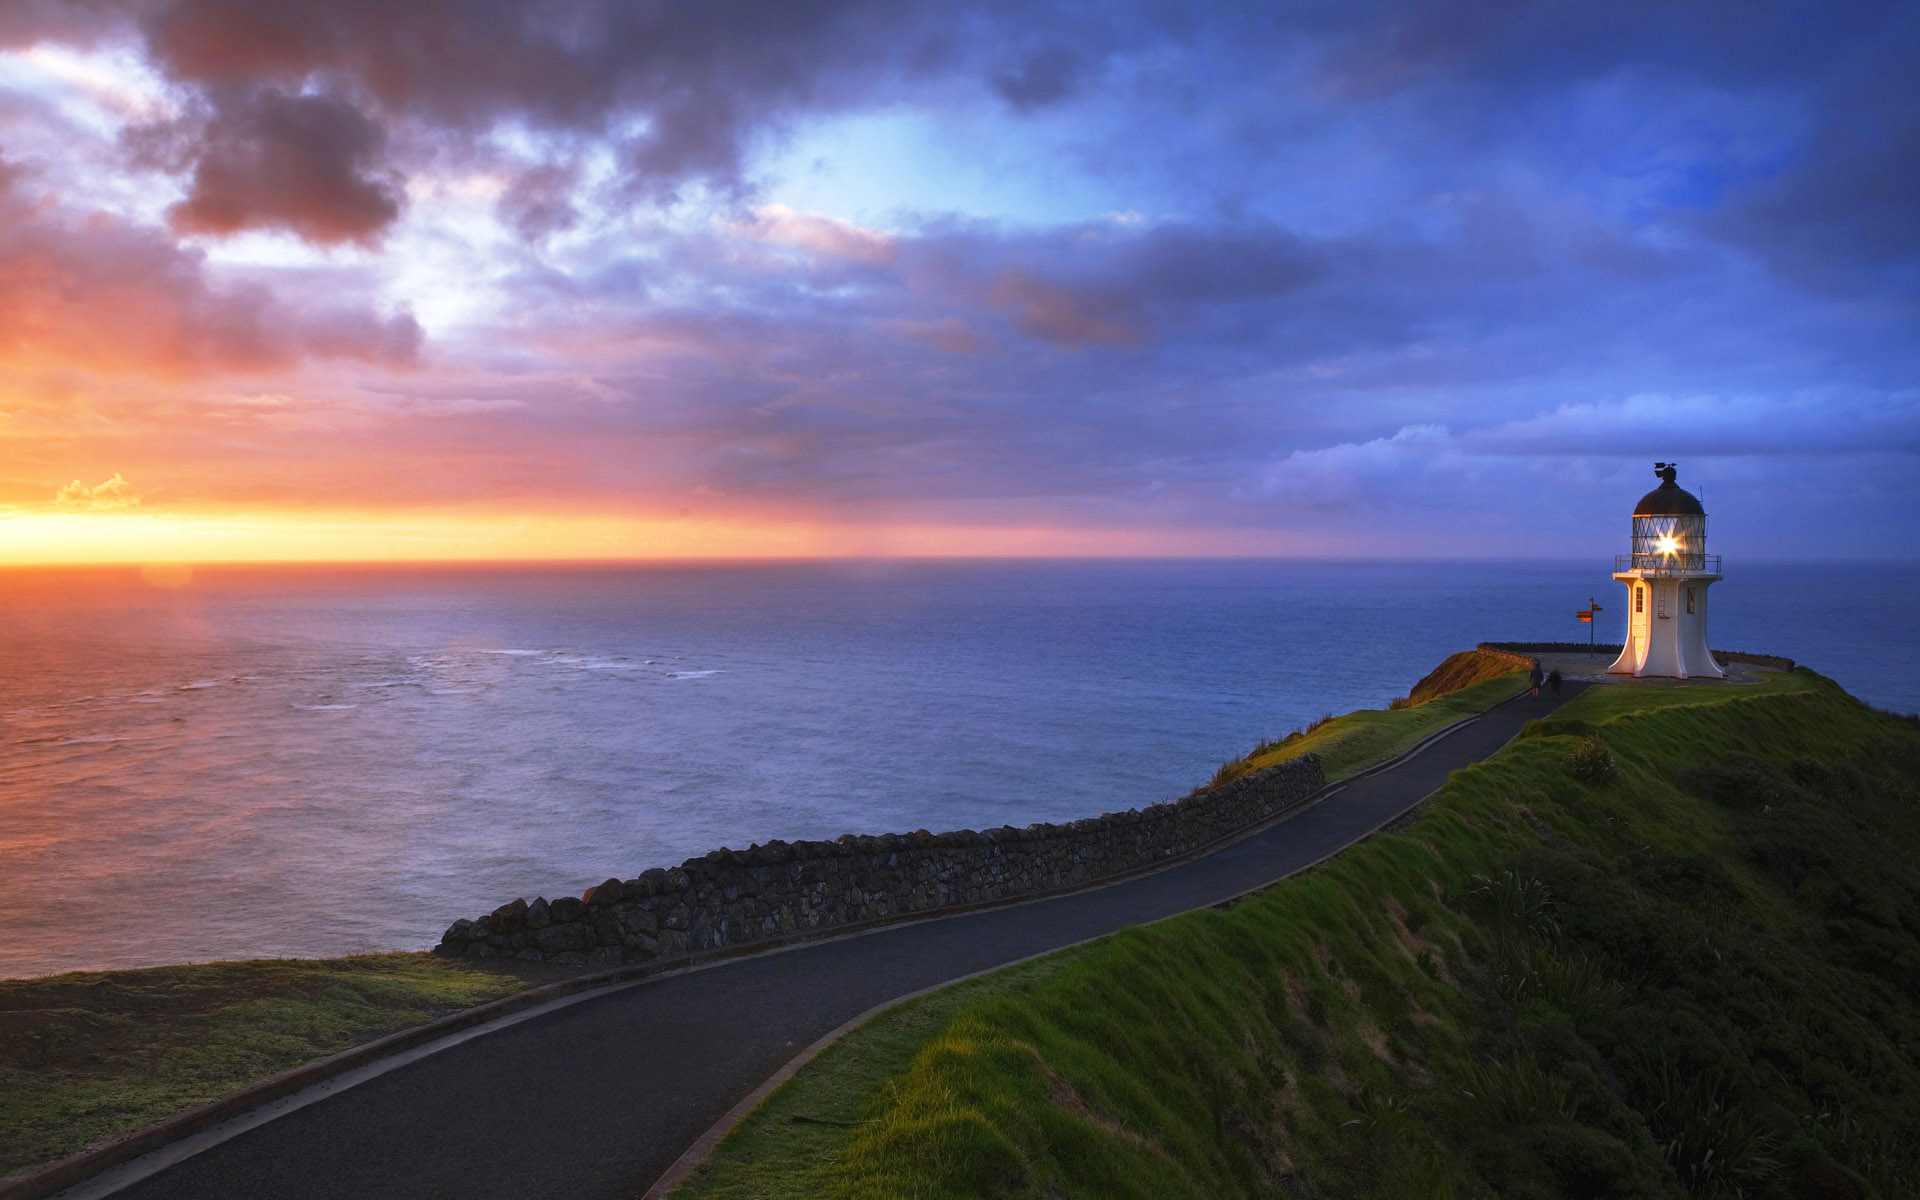 Scenery Wallpaper Includes Cape Reinga Lighthouse Leading You